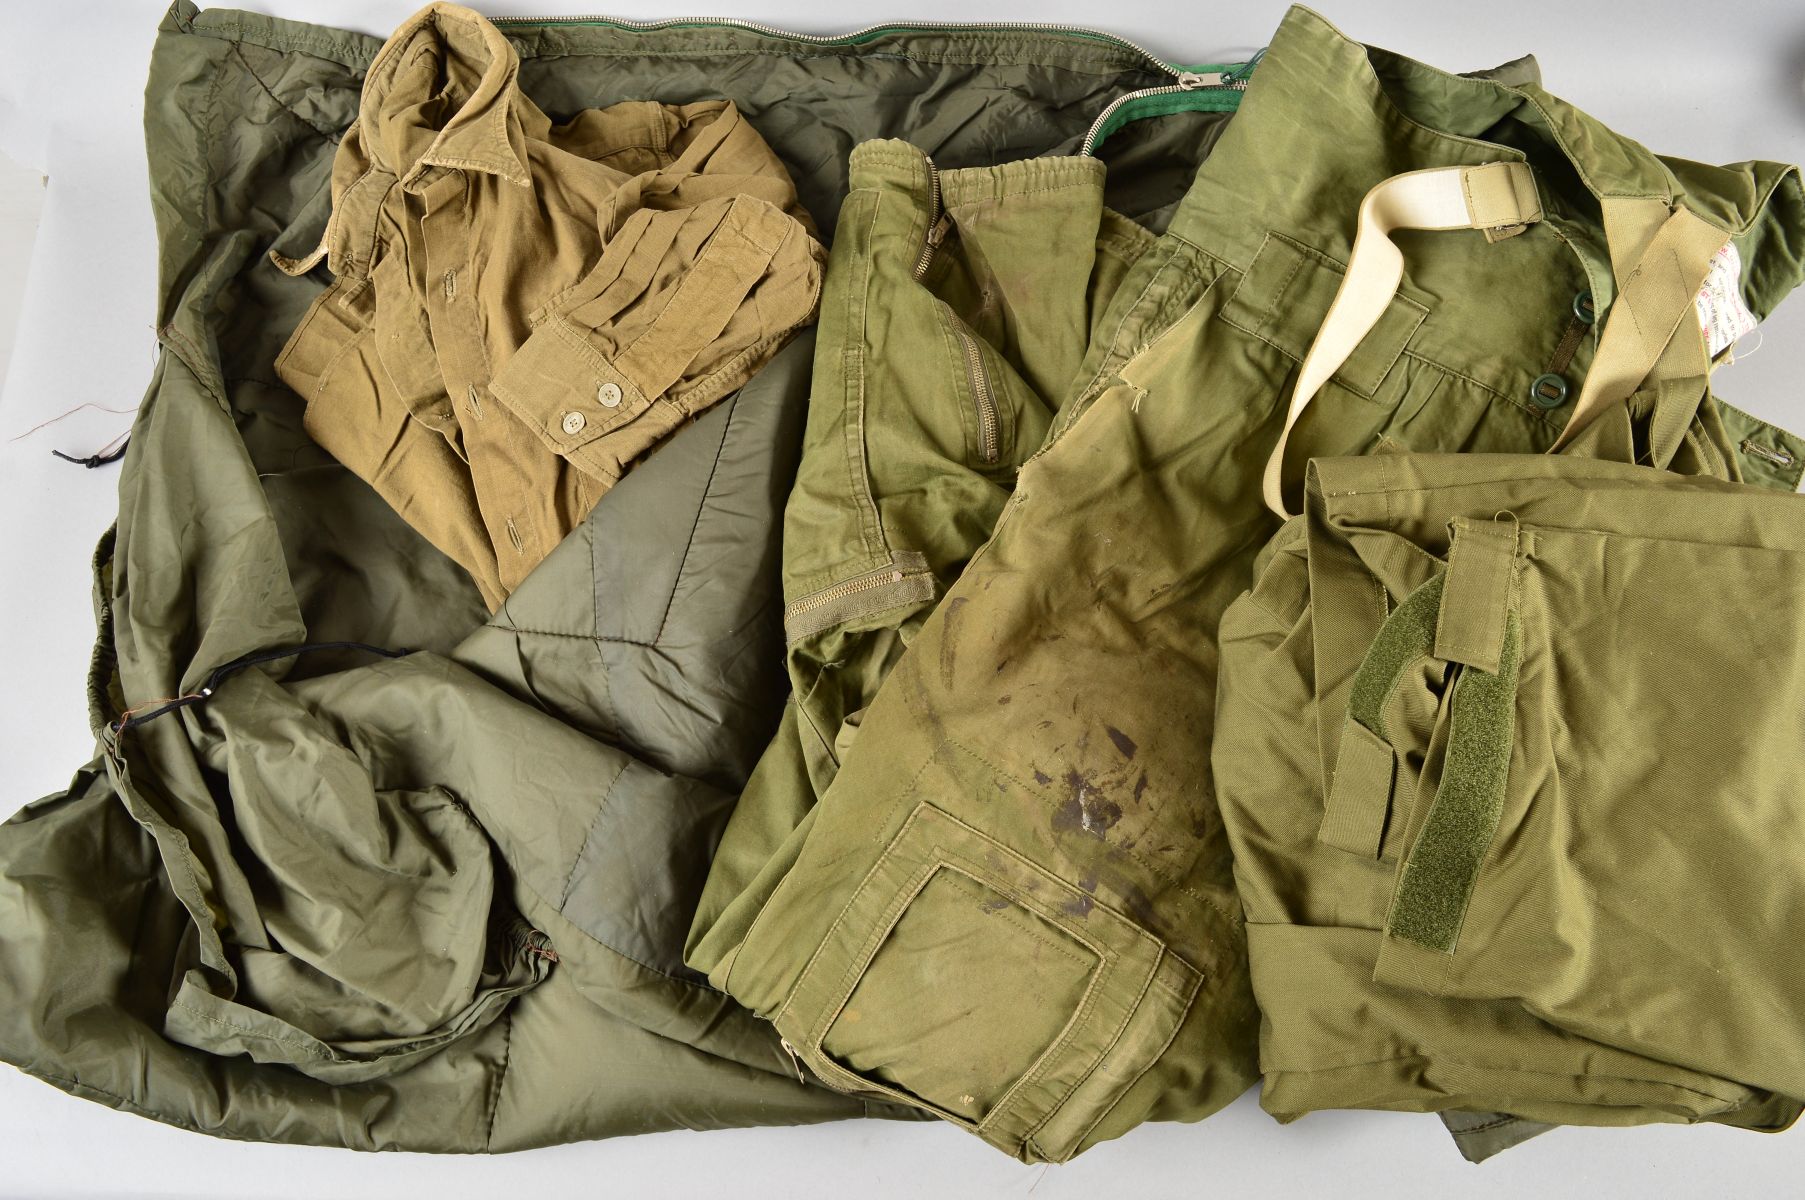 A BOX CONTAINING A MILITARY ISSUE GREEN BIVOUAC STYLE SLEEPING BAG, Air Crew trousers, Military